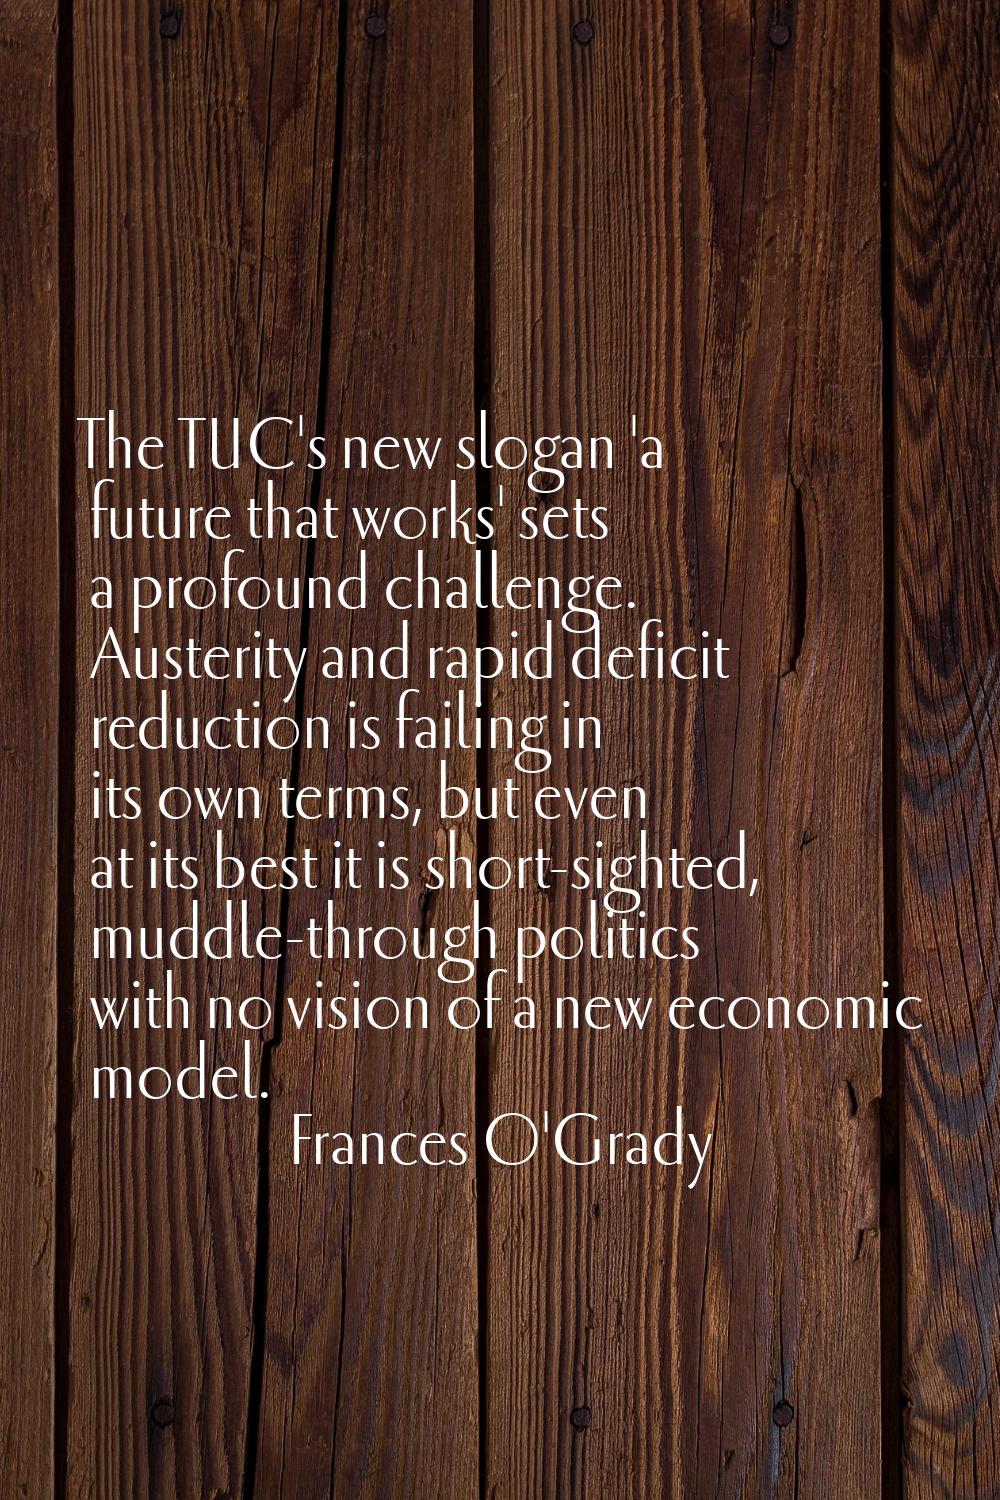 The TUC's new slogan 'a future that works' sets a profound challenge. Austerity and rapid deficit r